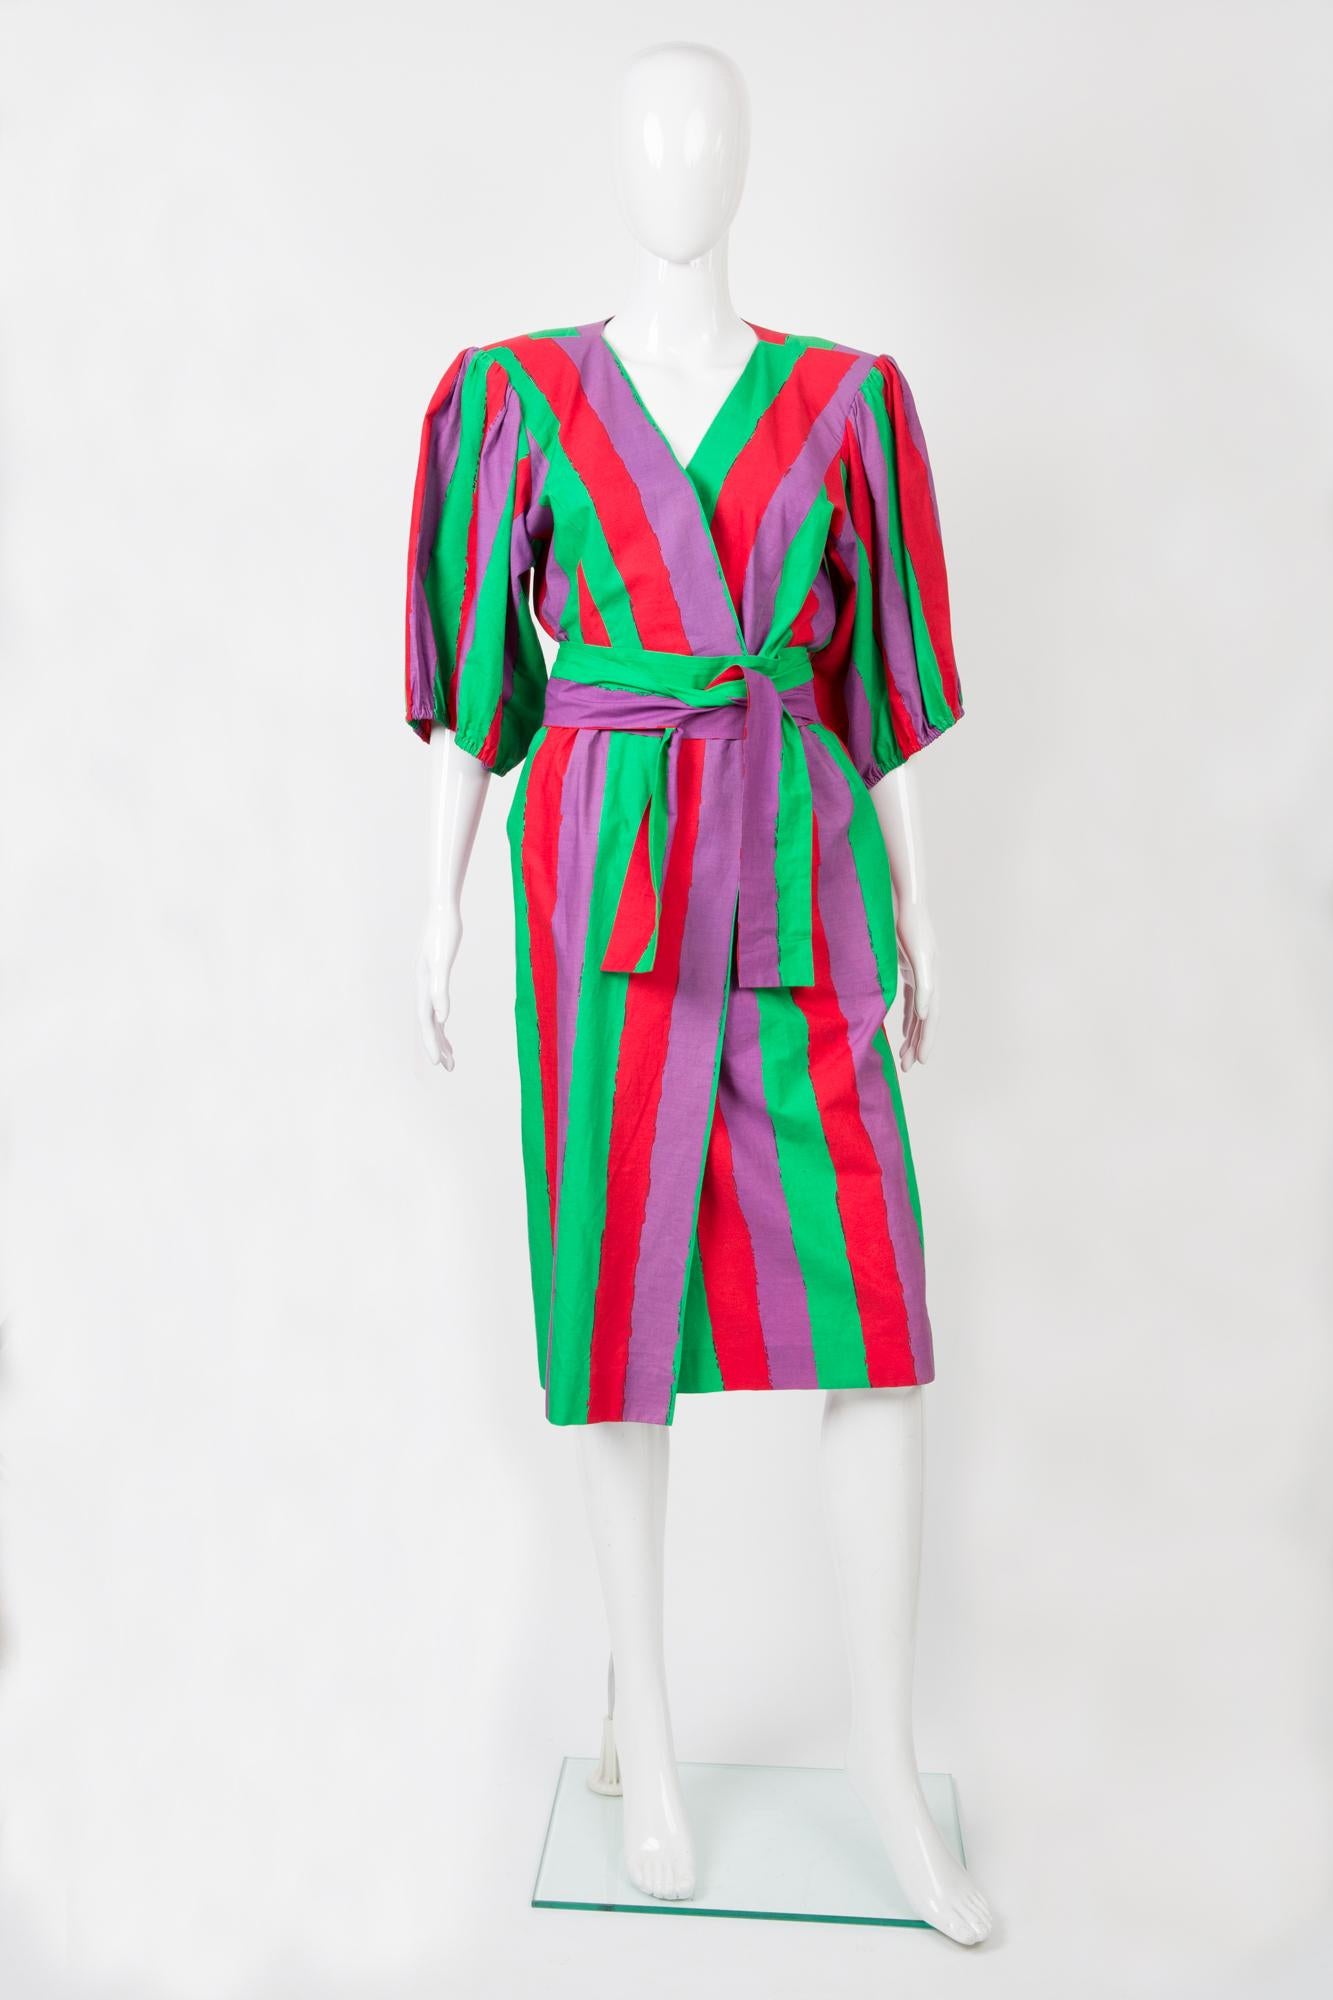 Yves Saint Laurent multicoloured cotton wrapped dress featuring a stripy pattern, a separated belt, shoulder pads, large puffy sleeves with elasticated cuff, back button opening, front pockets. 
100% cotton
In good vintage condition. Made in France.